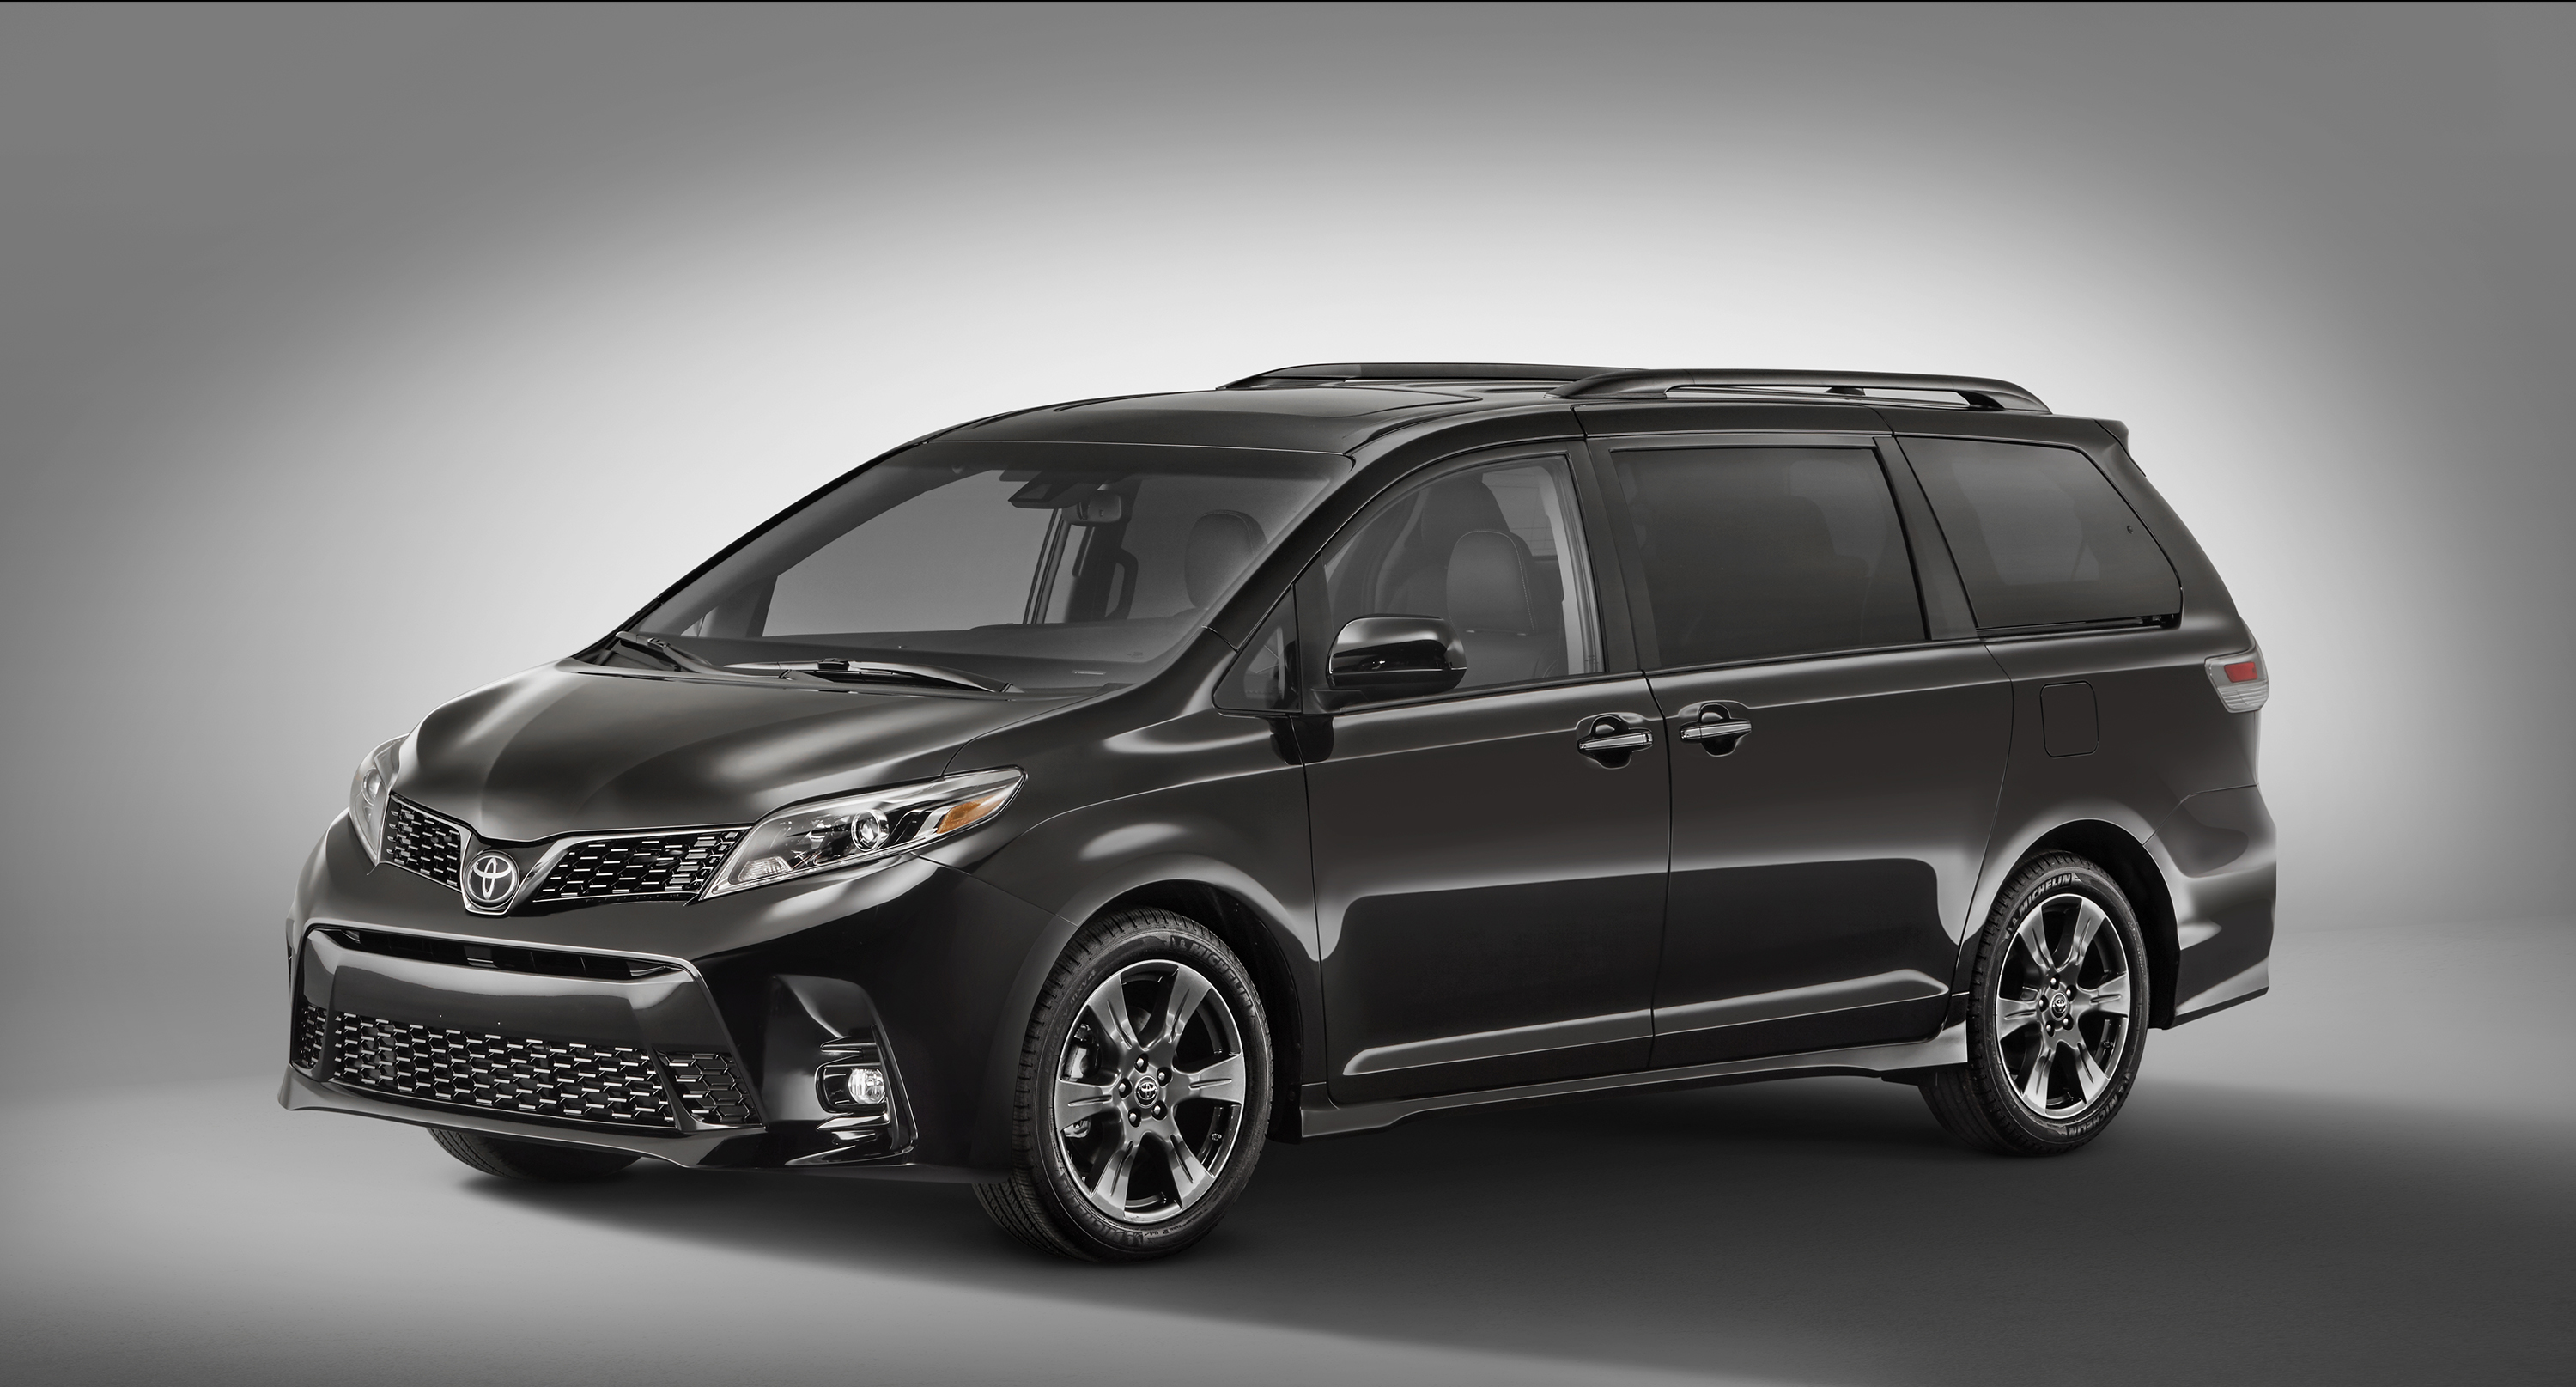 2019 Toyota Sienna: Model overview 